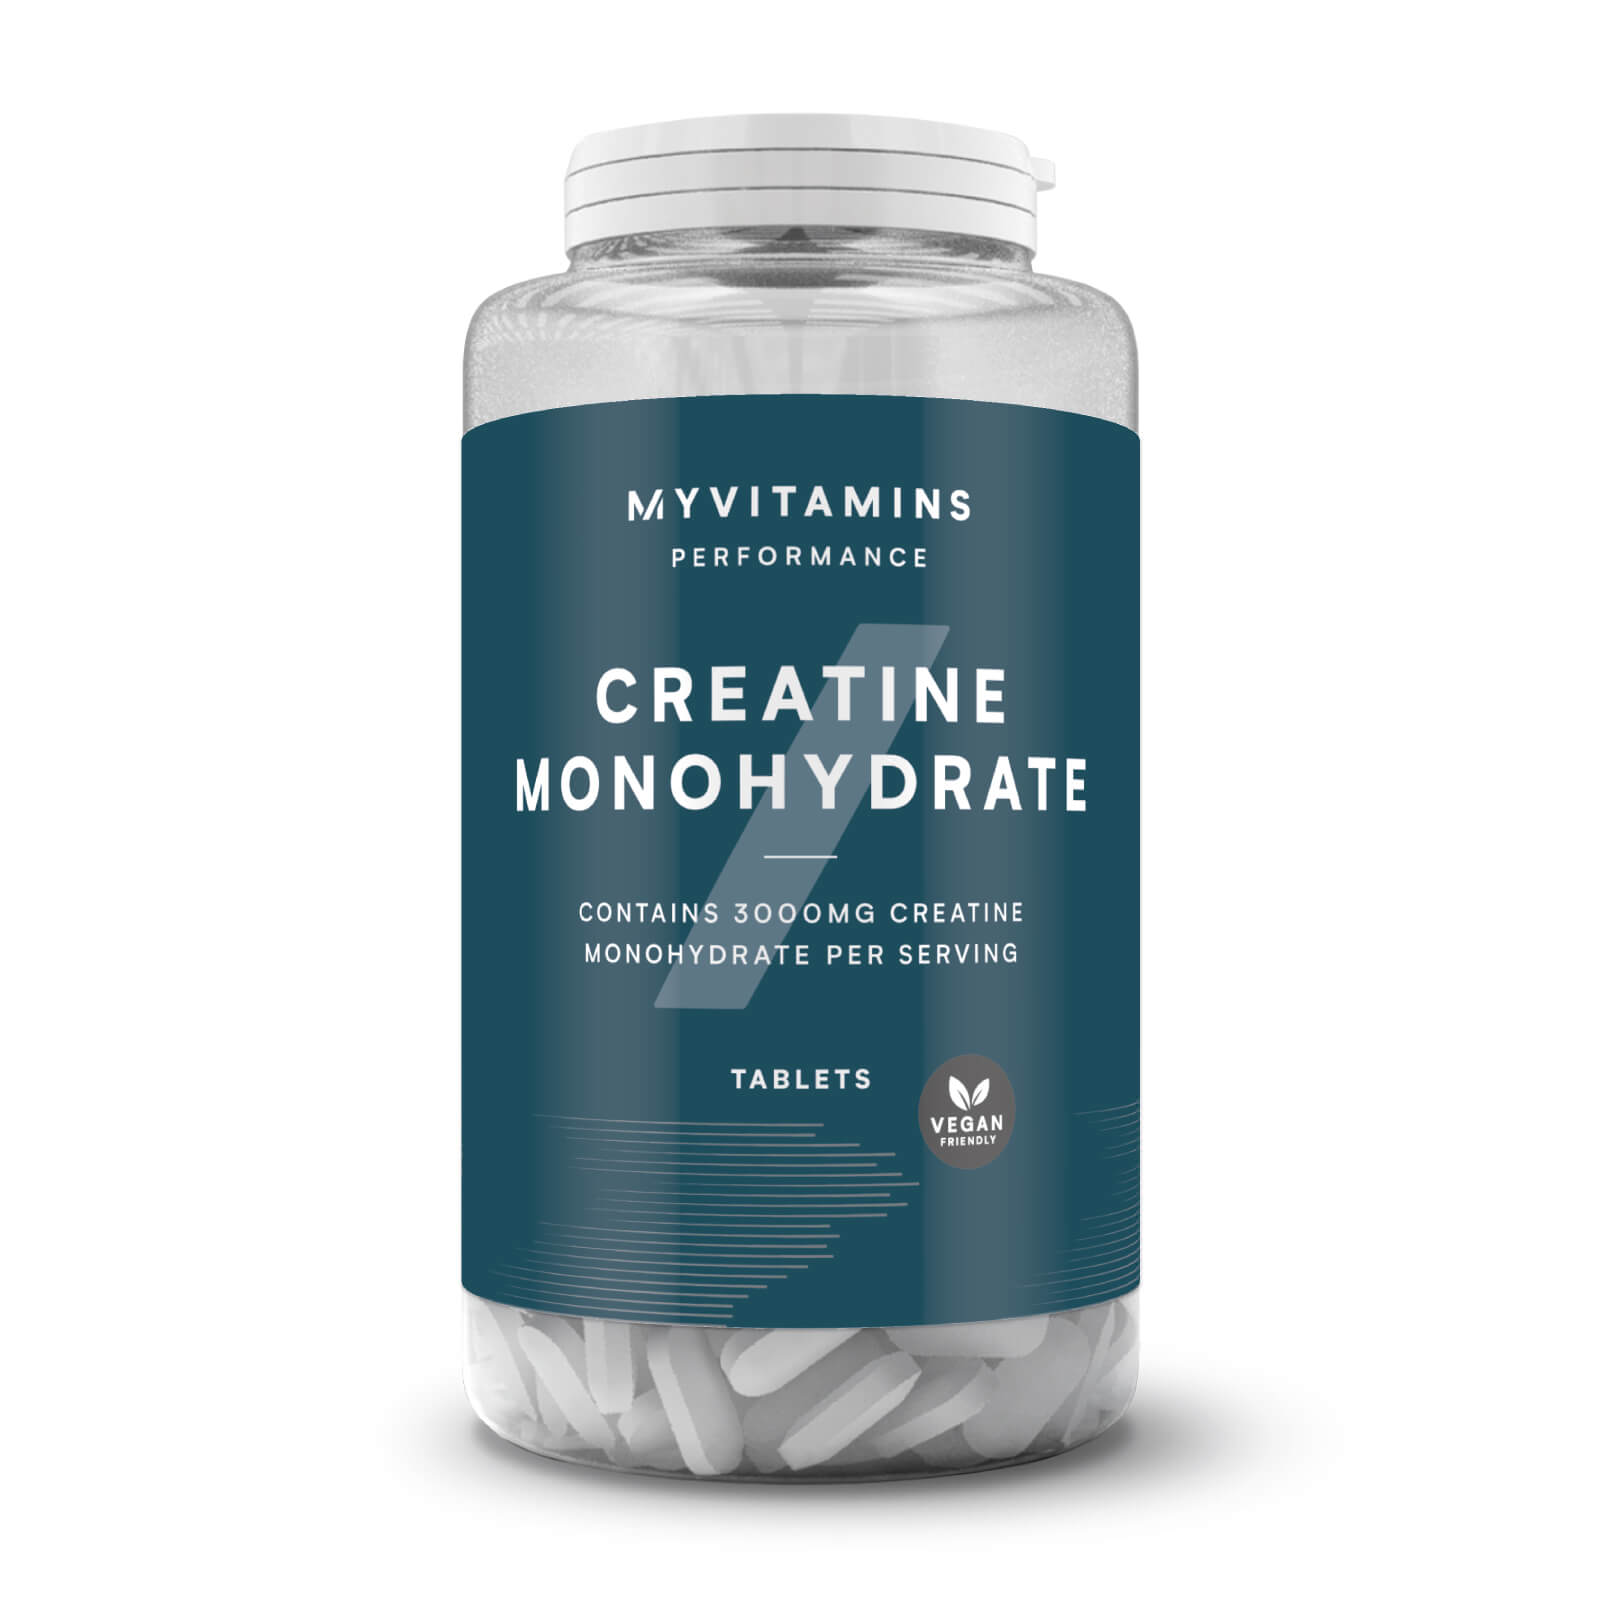 Creatine Monohydrate Tablets - 250Tablets